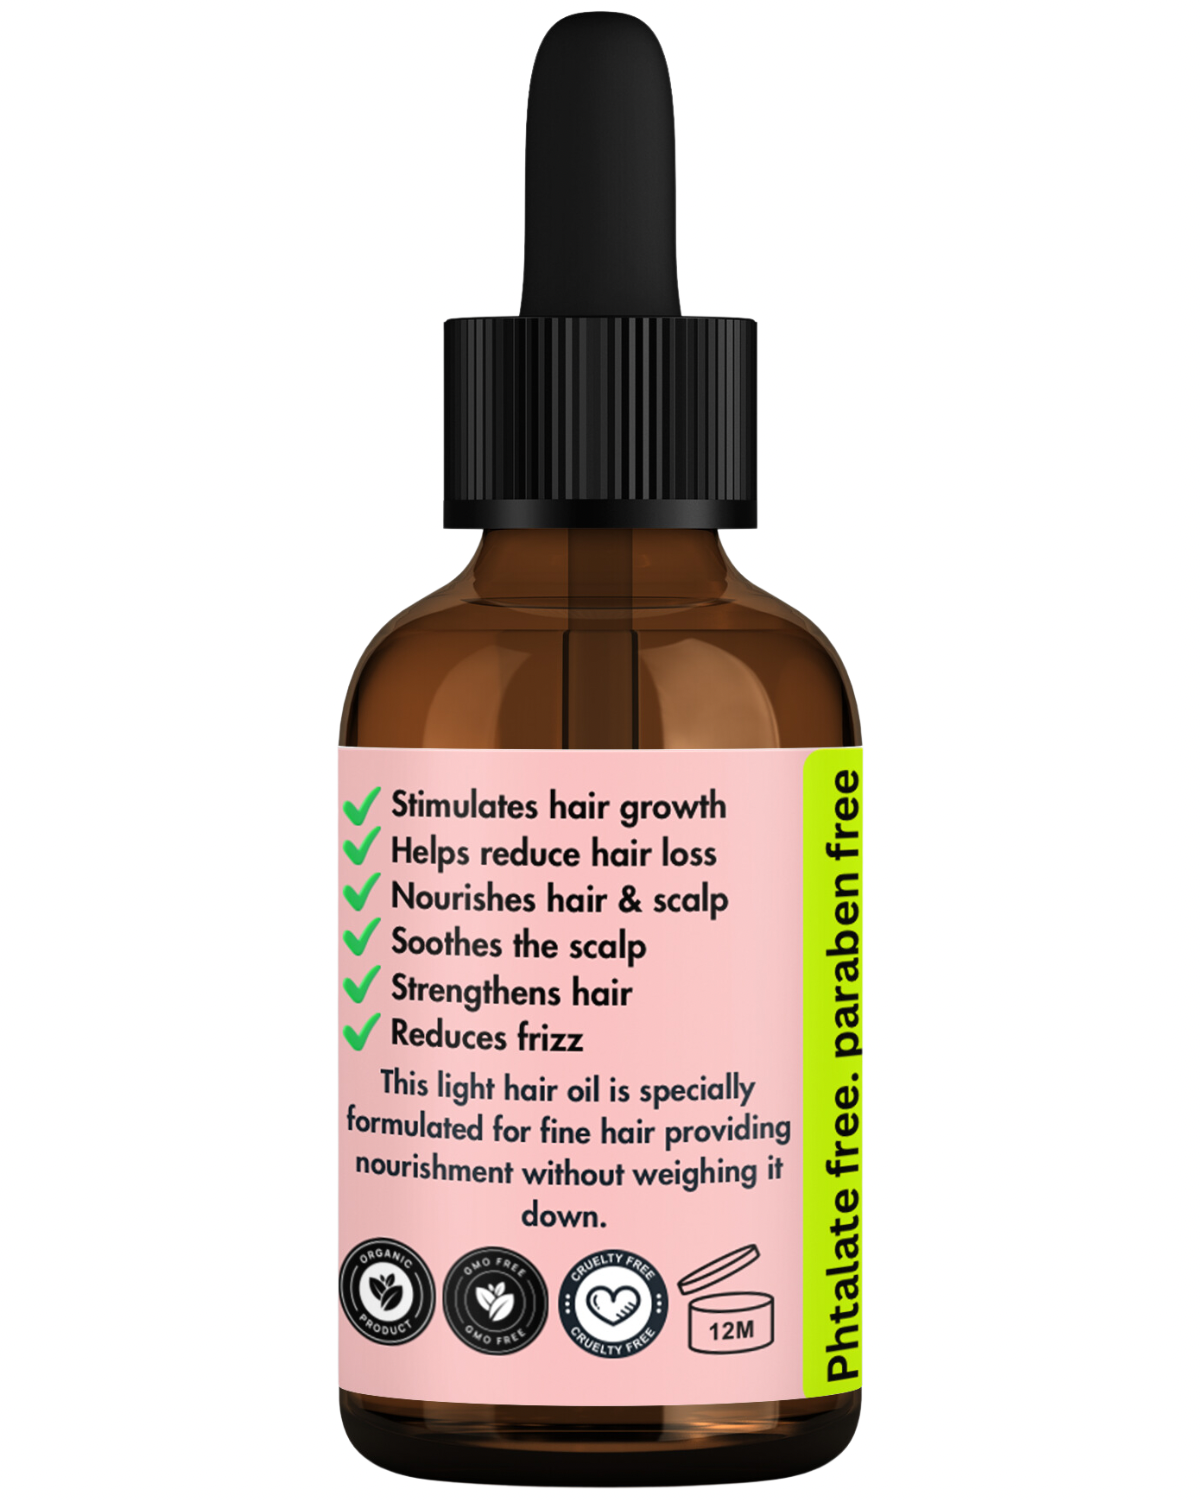 Organic Argan, Carrot Seed Oil with Saw Palmetto for Hair Growth 4 fl oz